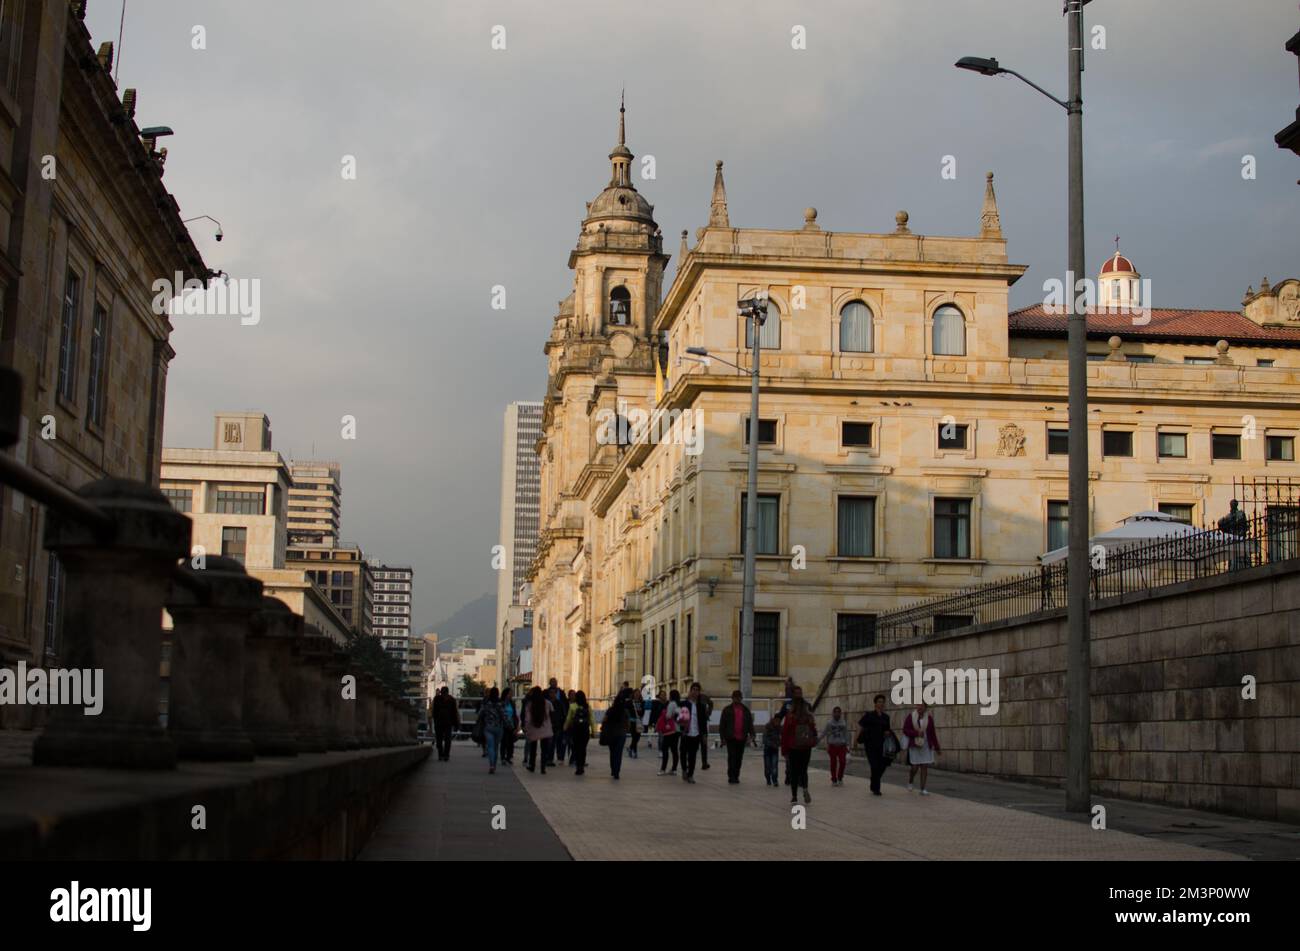 The Bolivar Square with ancient buildings and people walking in Bogota, Colombia Stock Photo